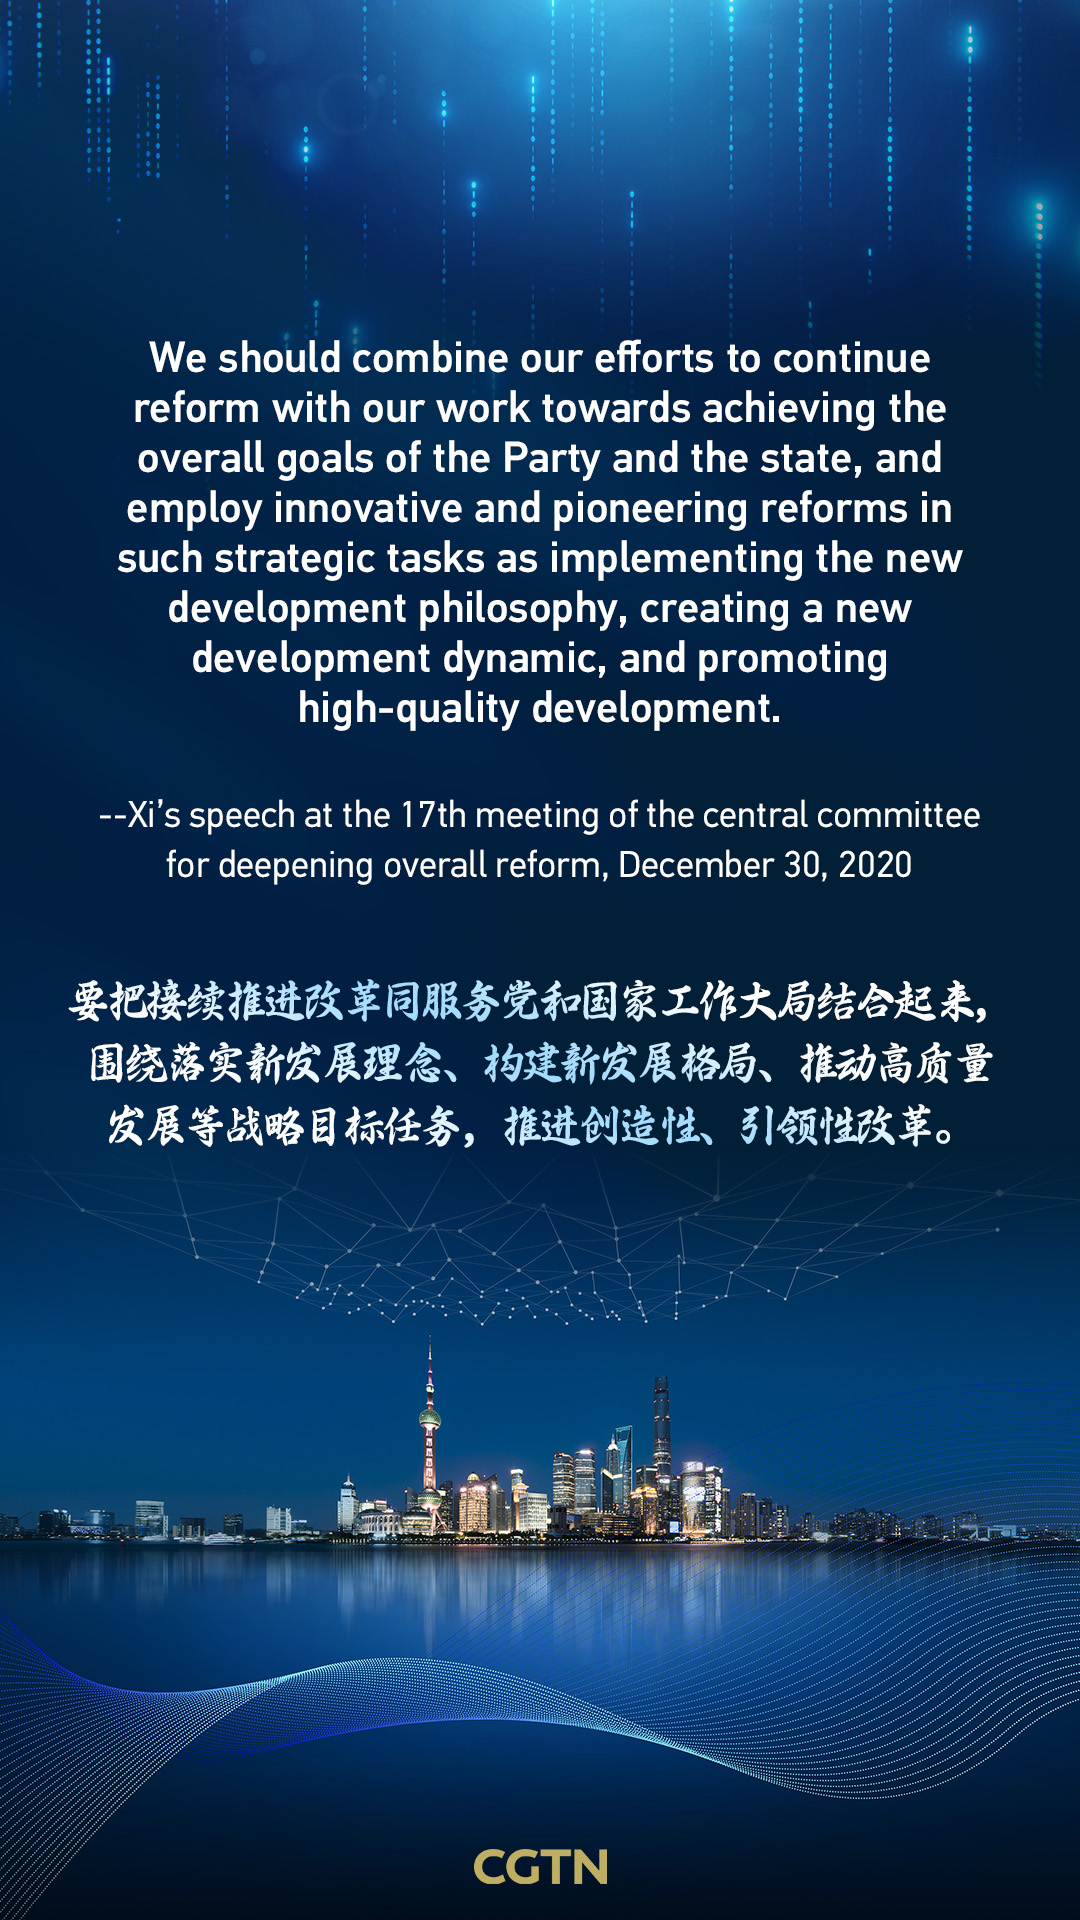 President Xi's key quotes on deepening reform